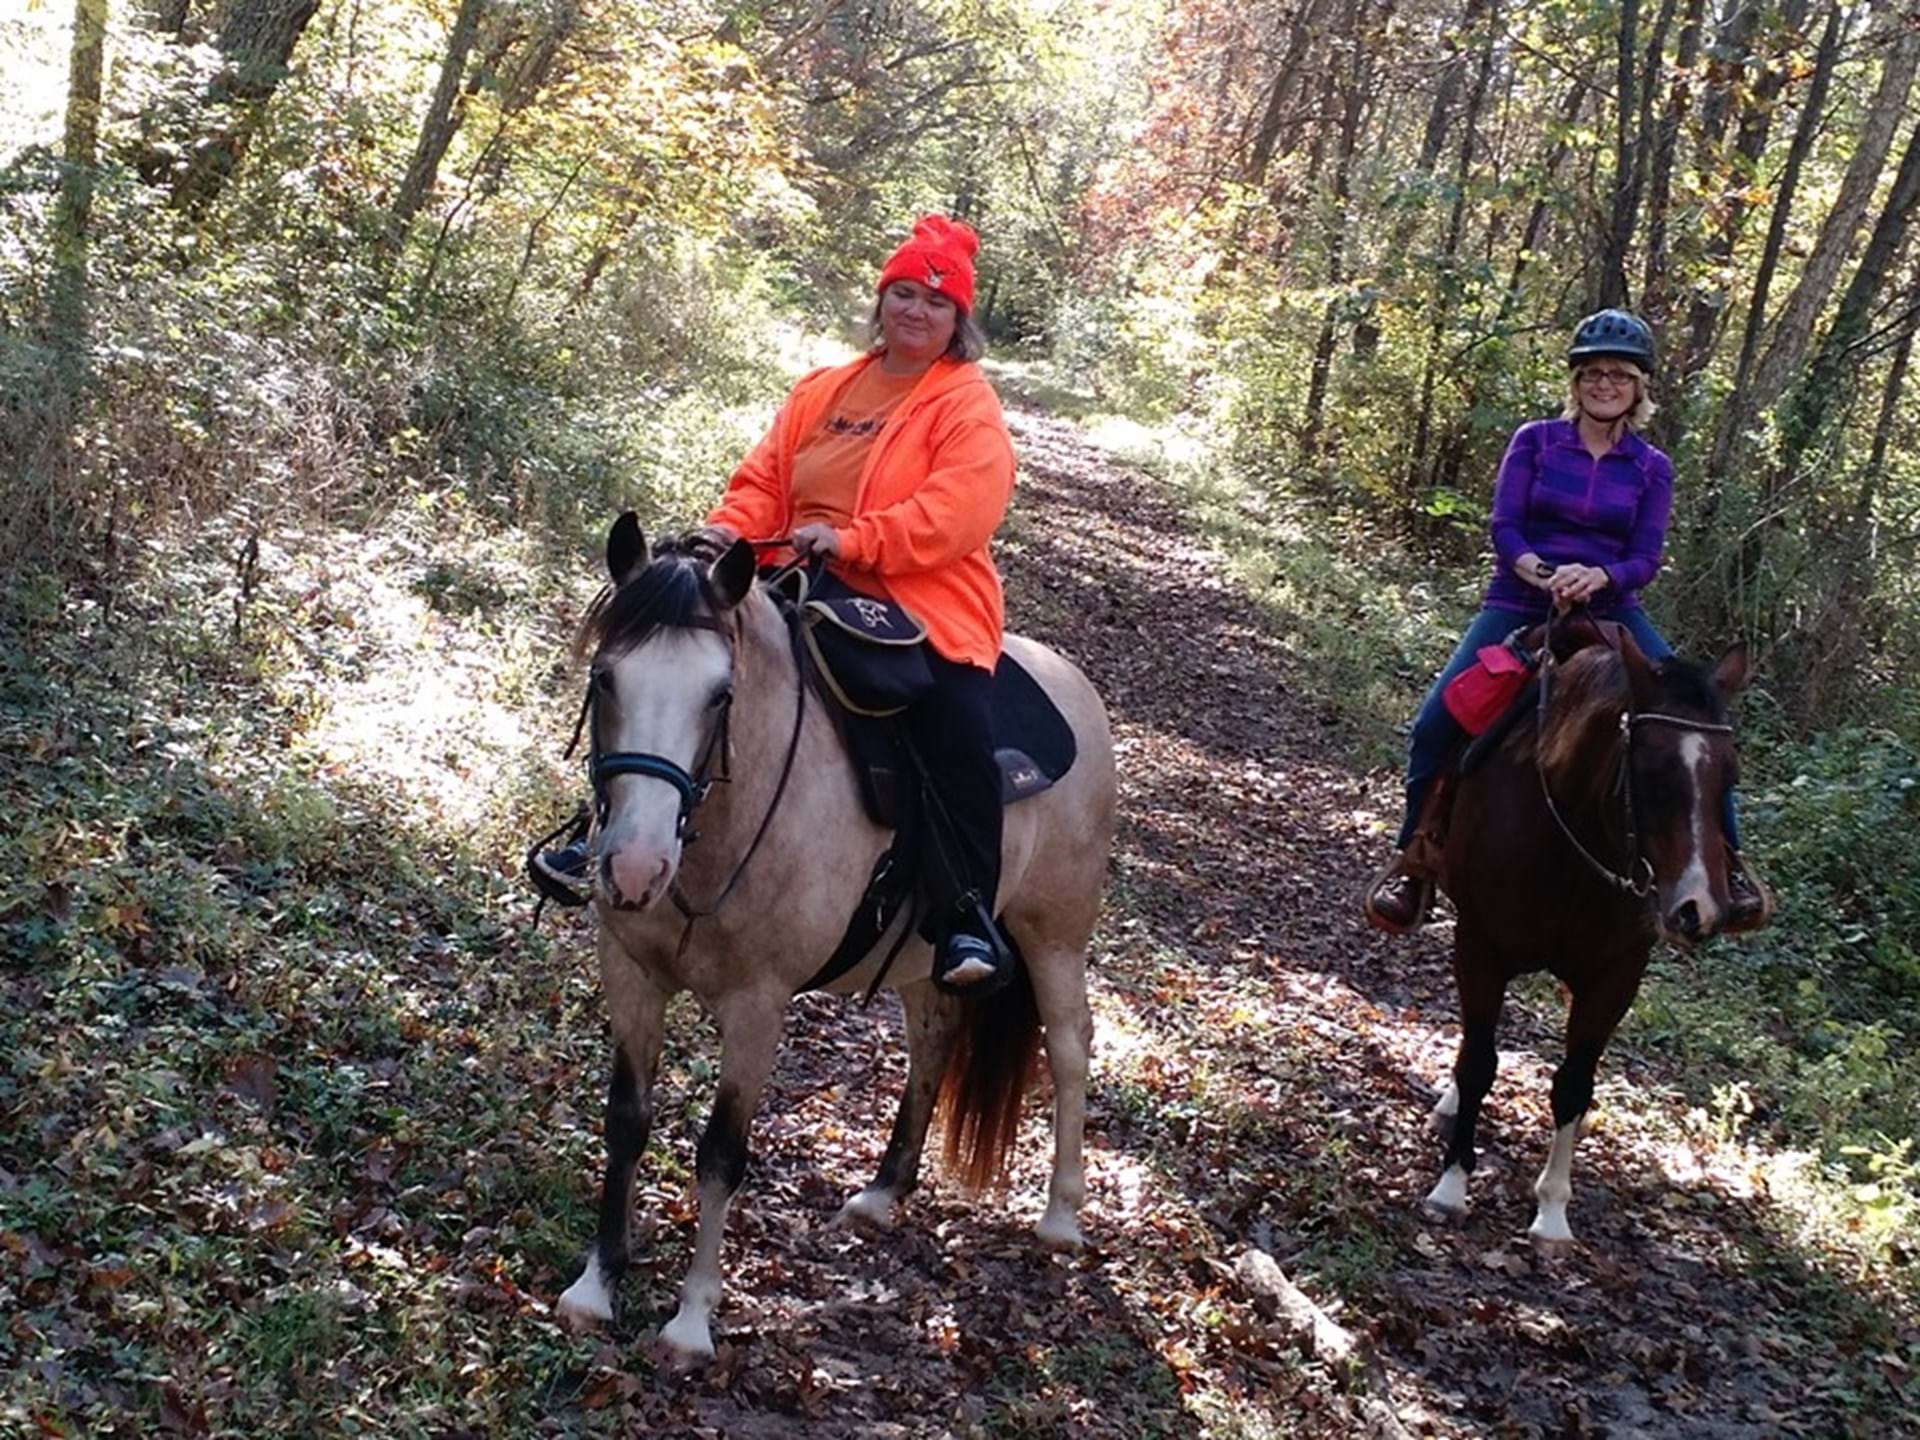 Over 12 miles of trails, equestrian friendly